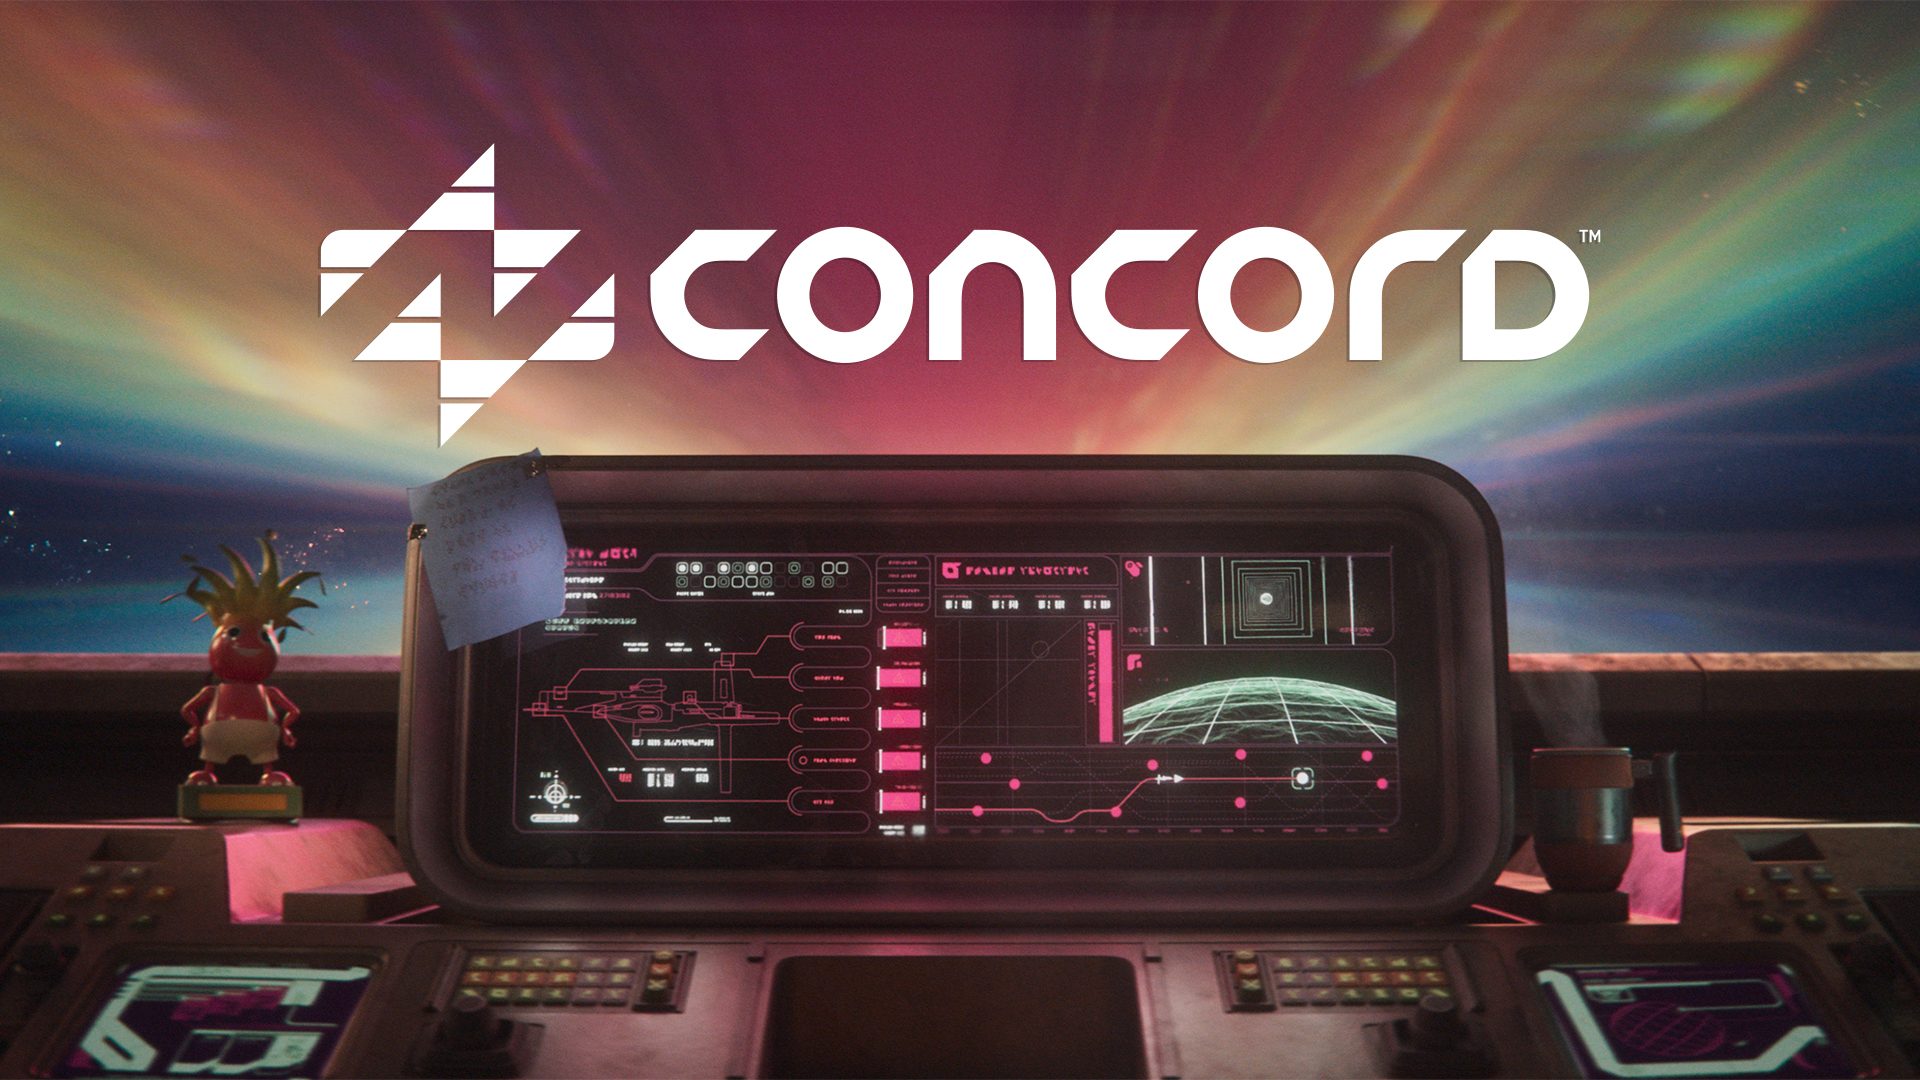 Introducing Concord—a new PVP multiplayer FPS from Firewalk